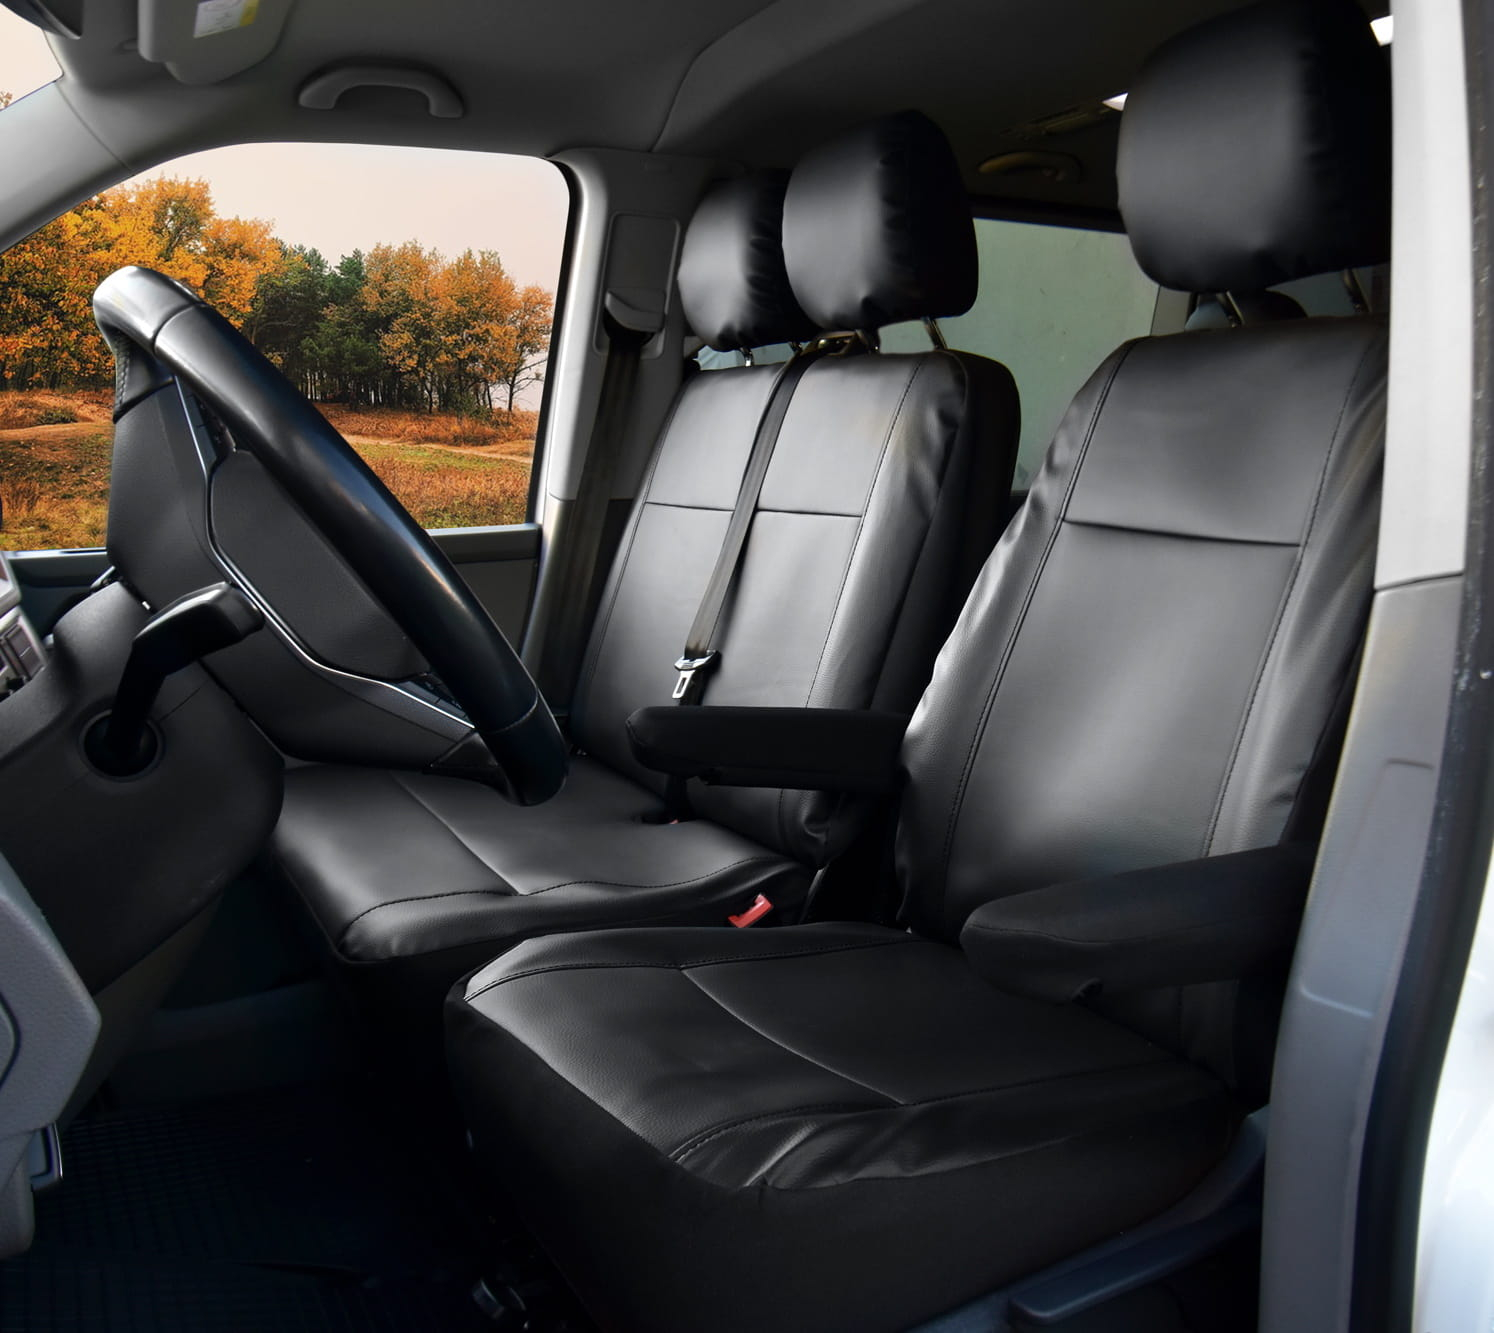 VW T5 Transporter/Caravelle/Multivan (from 2003) Dedicated covers by MEISTER (black eco-leather)